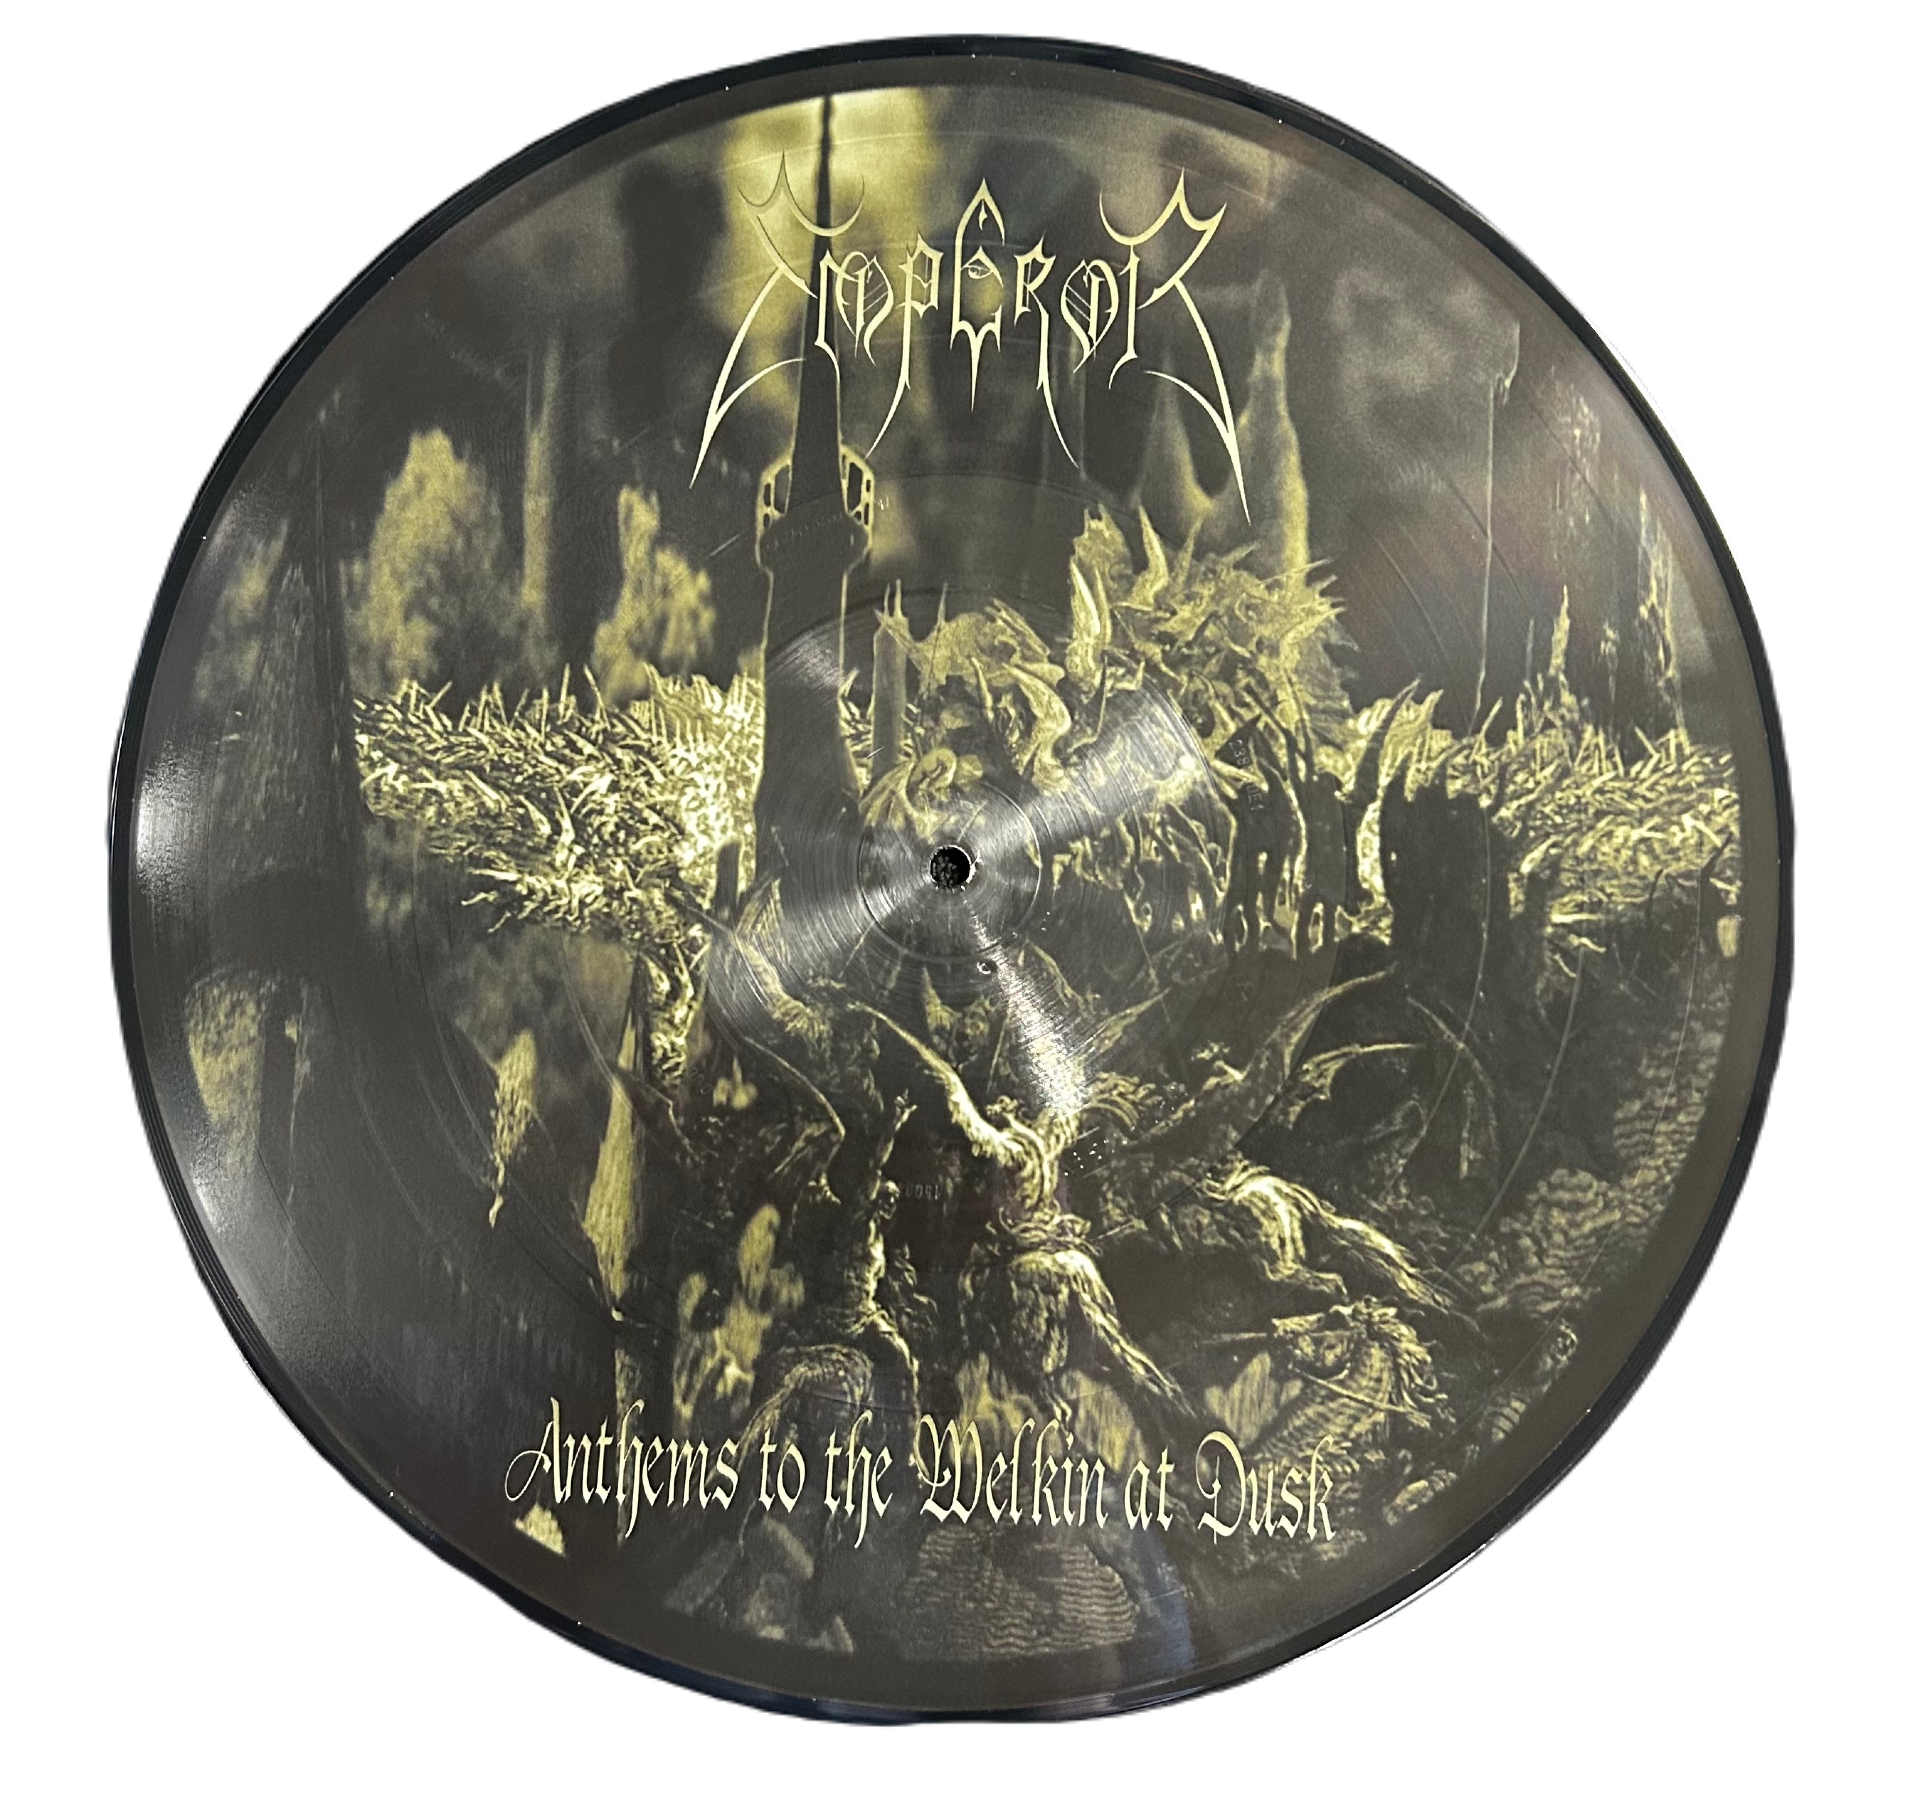 Emperor – Anthems To The Welkin At Dusk LP (Limited Edition Picture Disc)